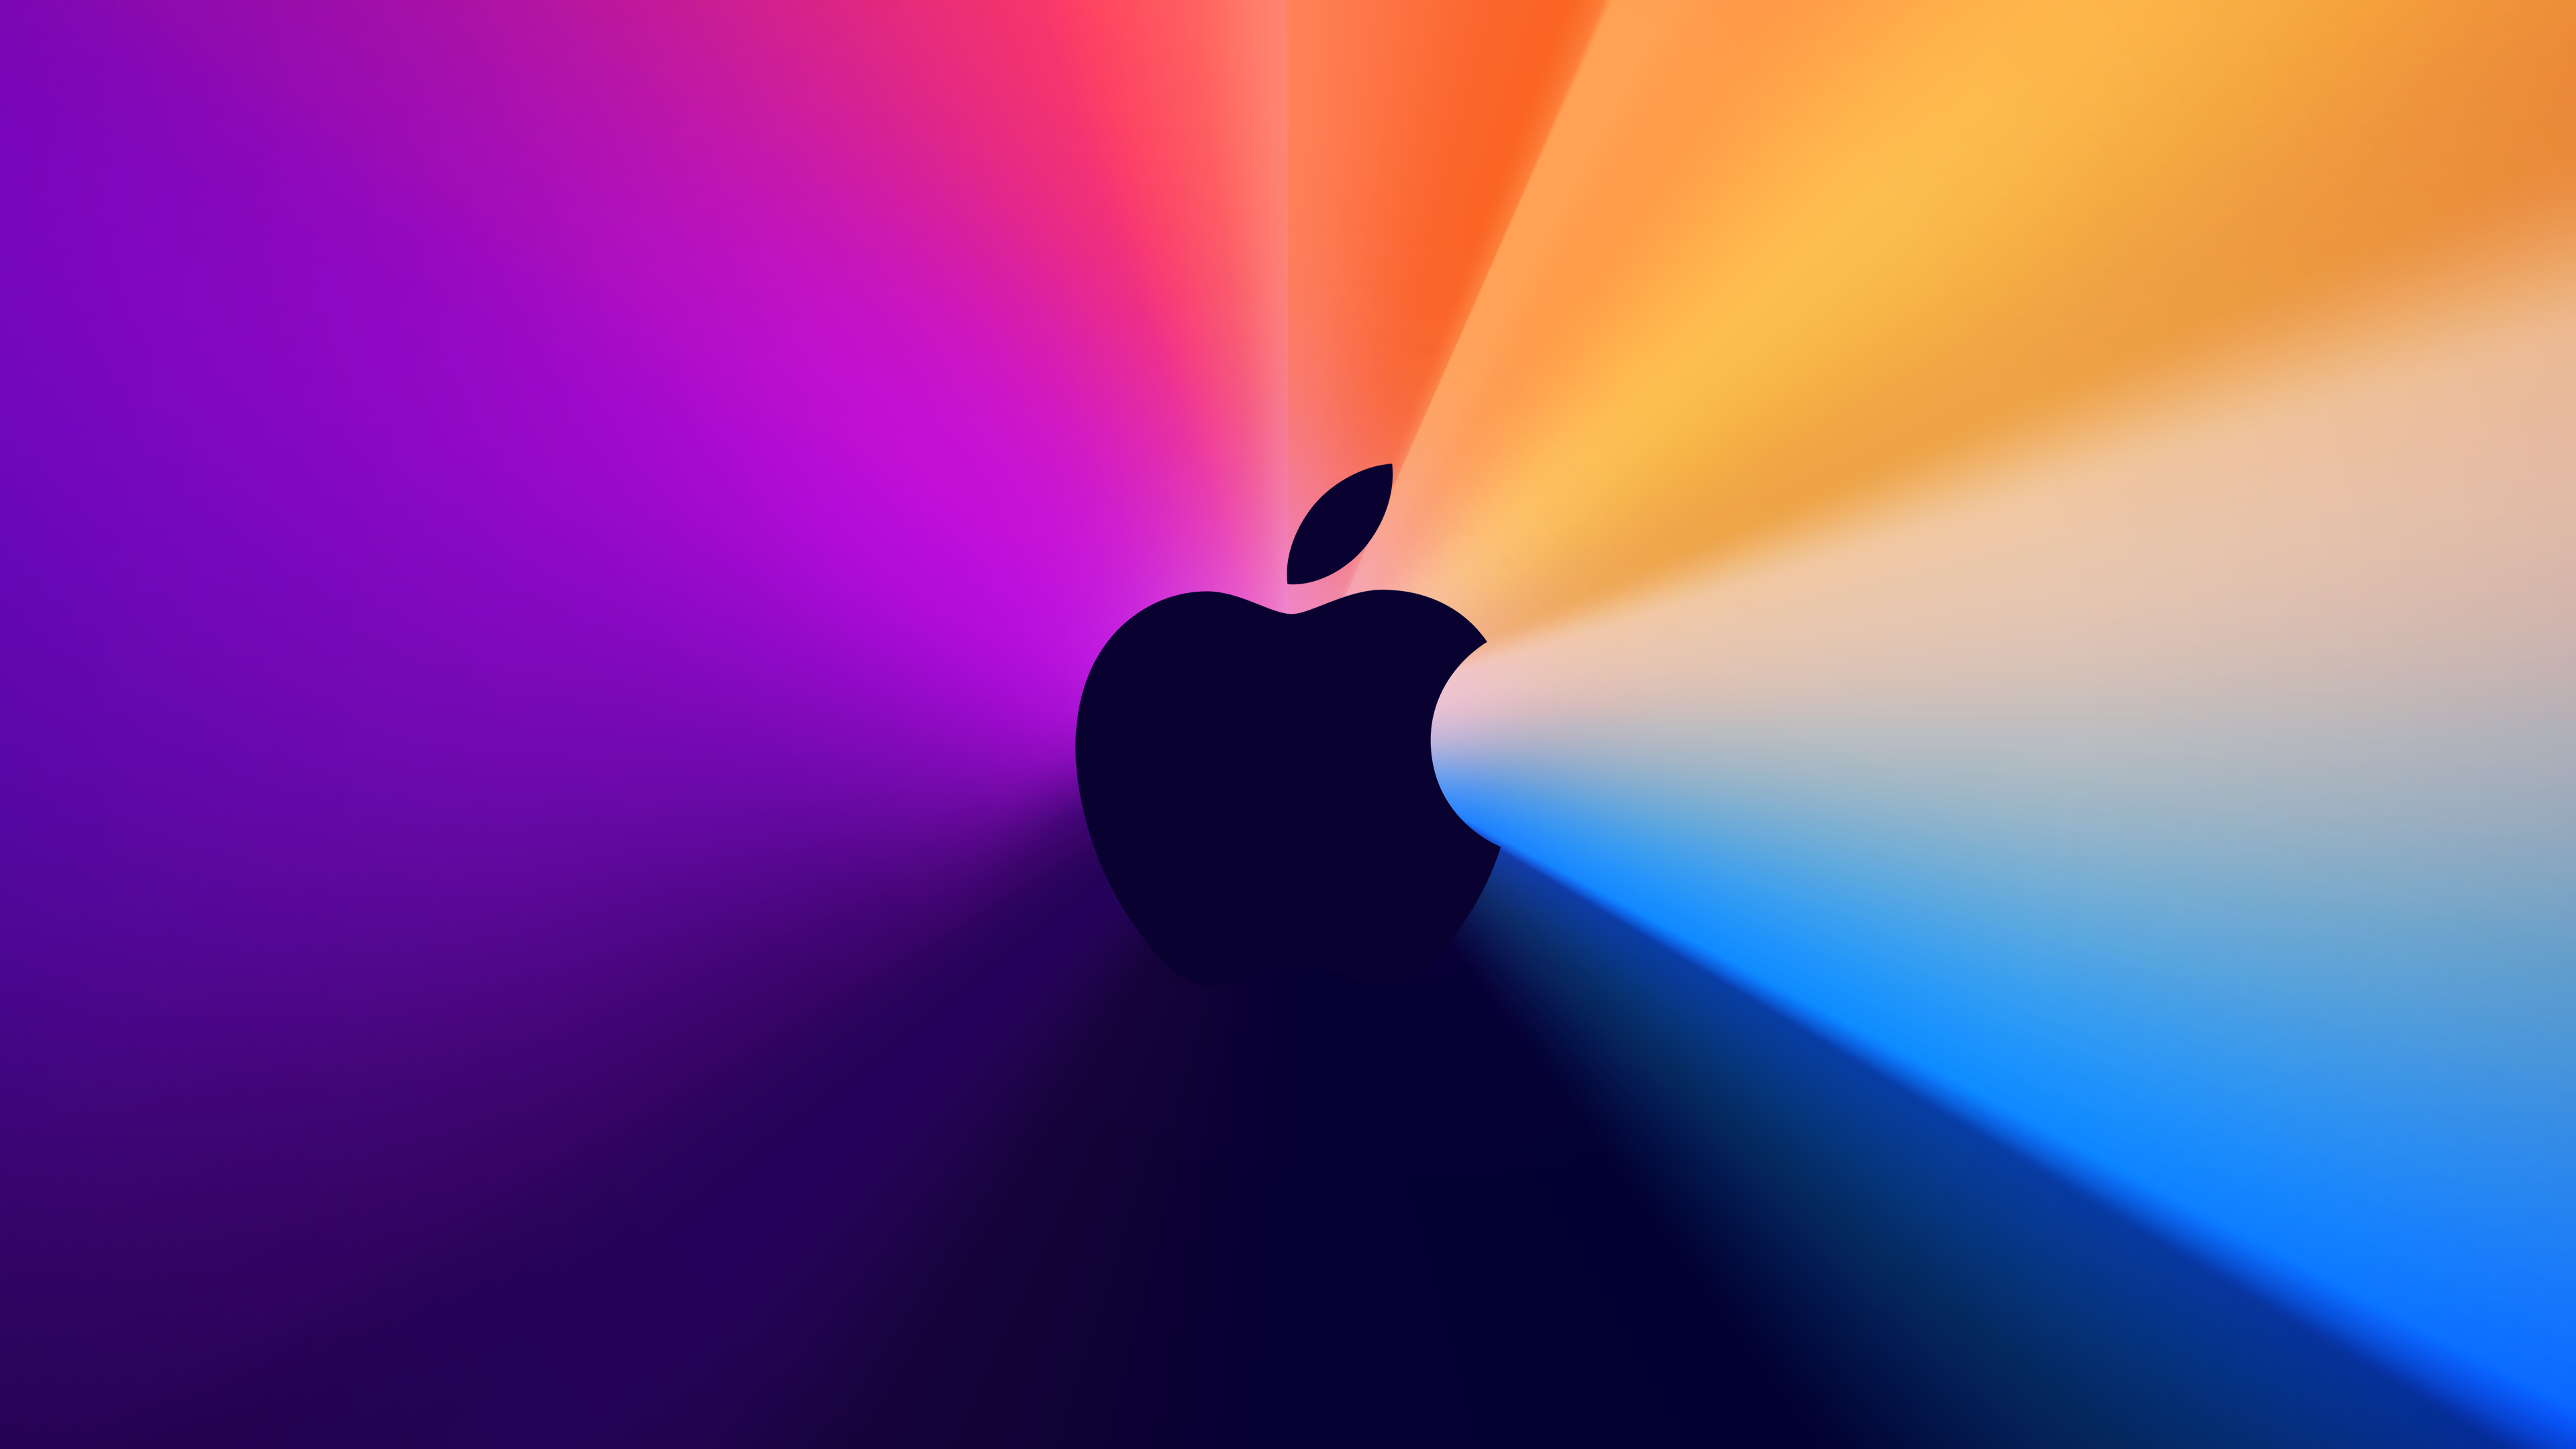 I recreated Apple's One More Thing promotional image as a 4K Desktop Wallpaper!